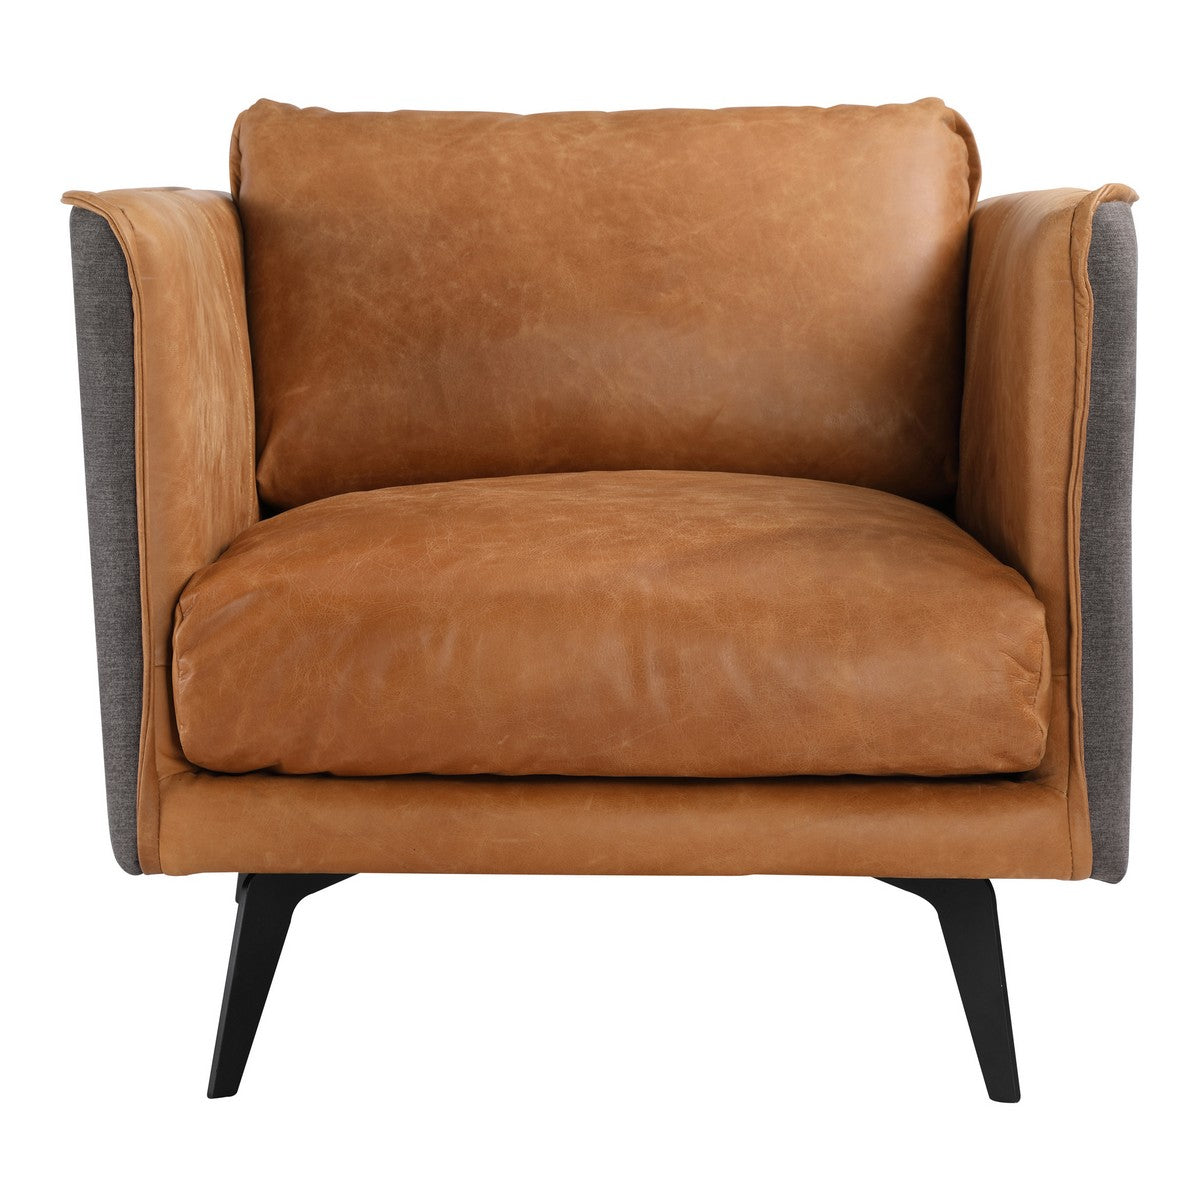 Moe's Home Collection Messina Leather Arm Chair Cognac - PK-1096-23 - Moe's Home Collection - lounge chairs - Minimal And Modern - 1